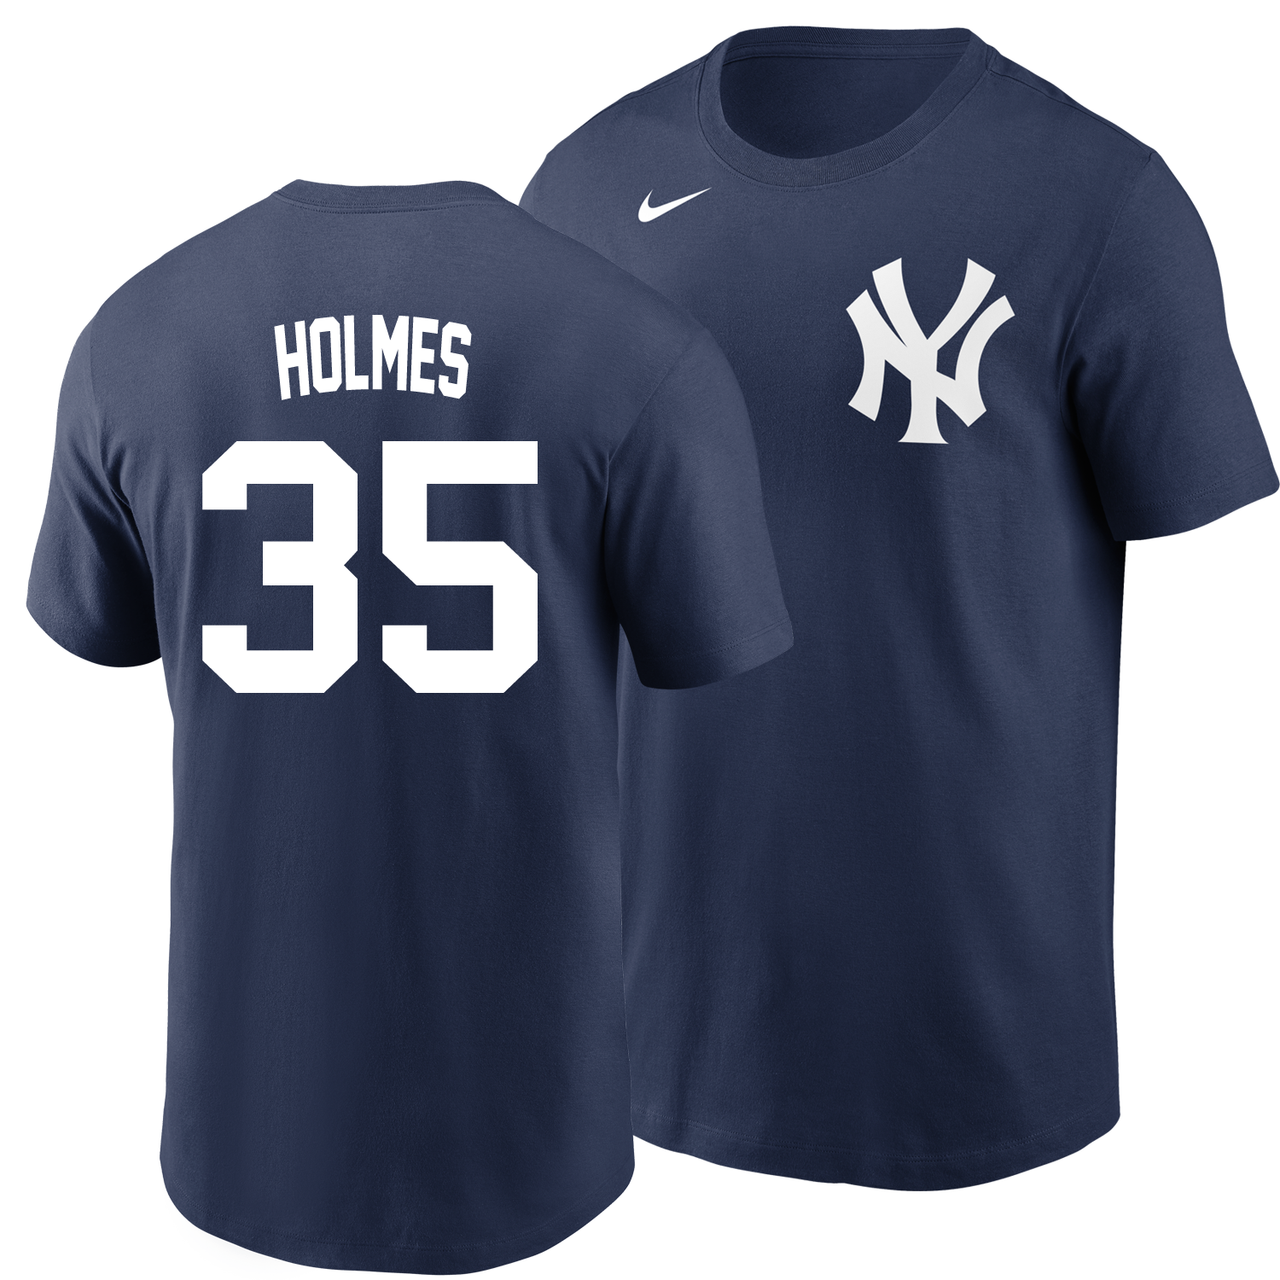 clay holmes jersey